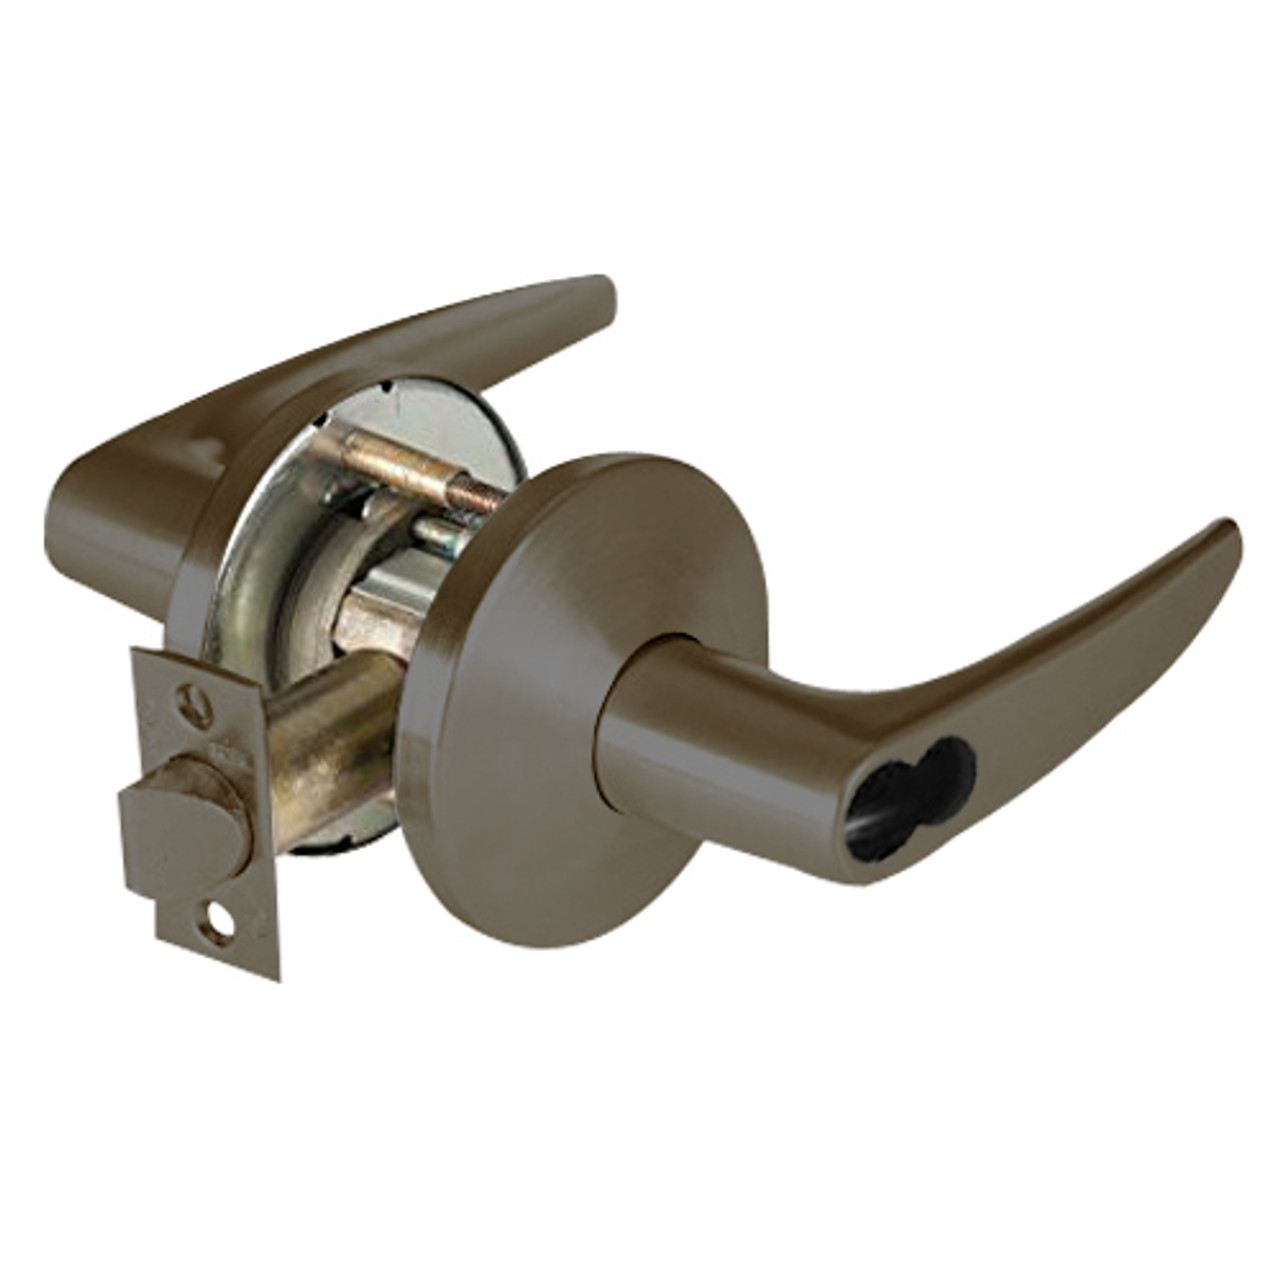 9KW37DEU16LSTK613 Best 9KW Series Fail Secure Electromechanical Heavy Duty Cylindrical Lock with Curved w/ No Return Style in Oil Rubbed Bronze